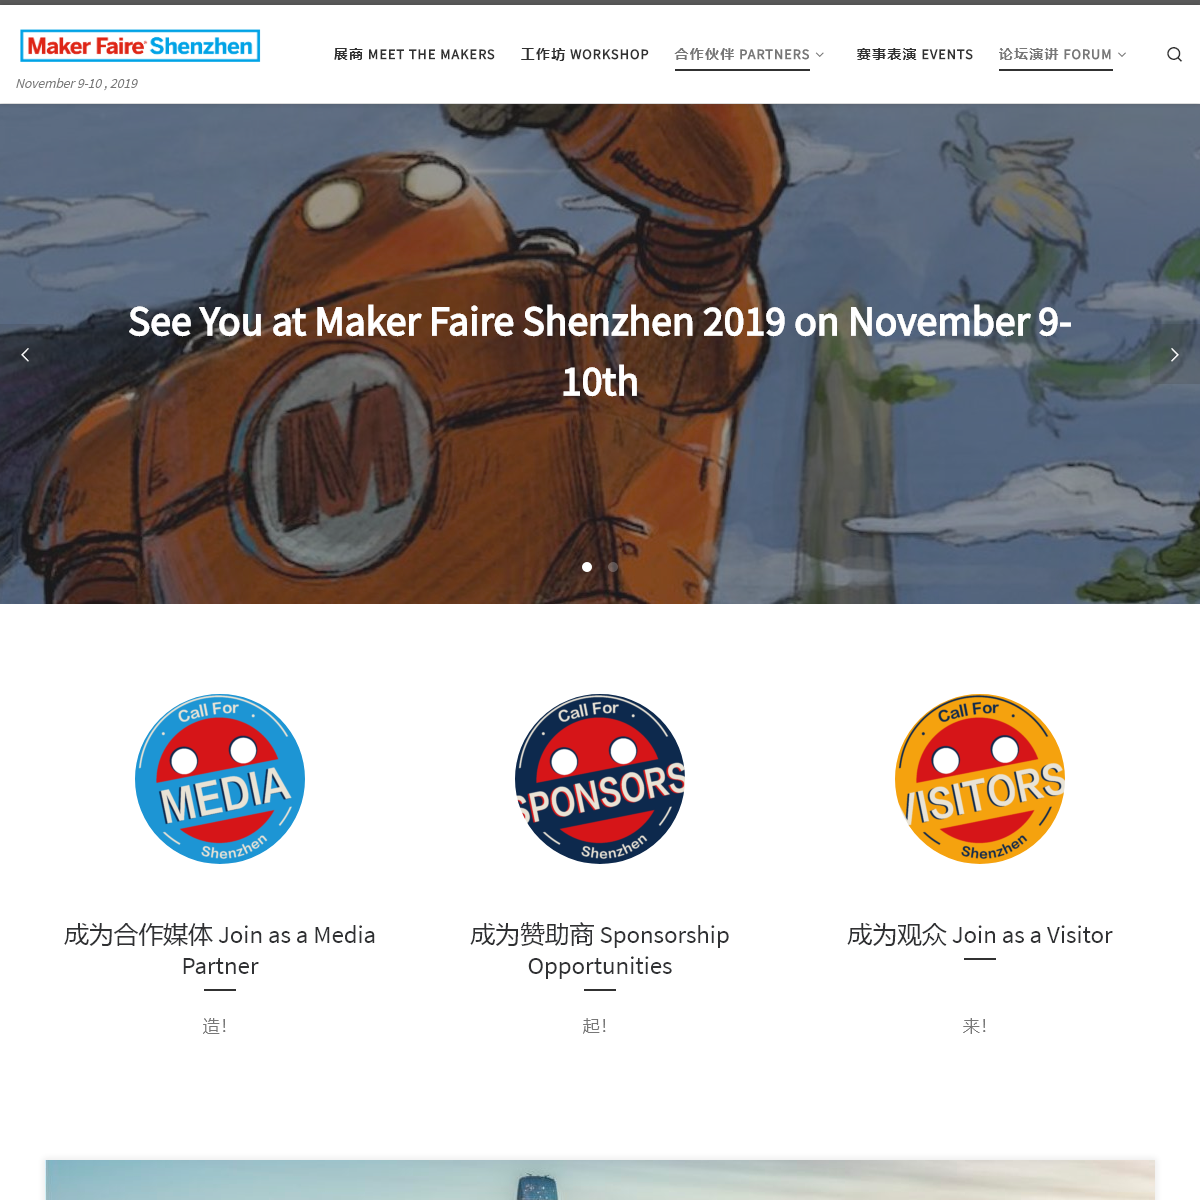 A complete backup of shenzhenmakerfaire.com